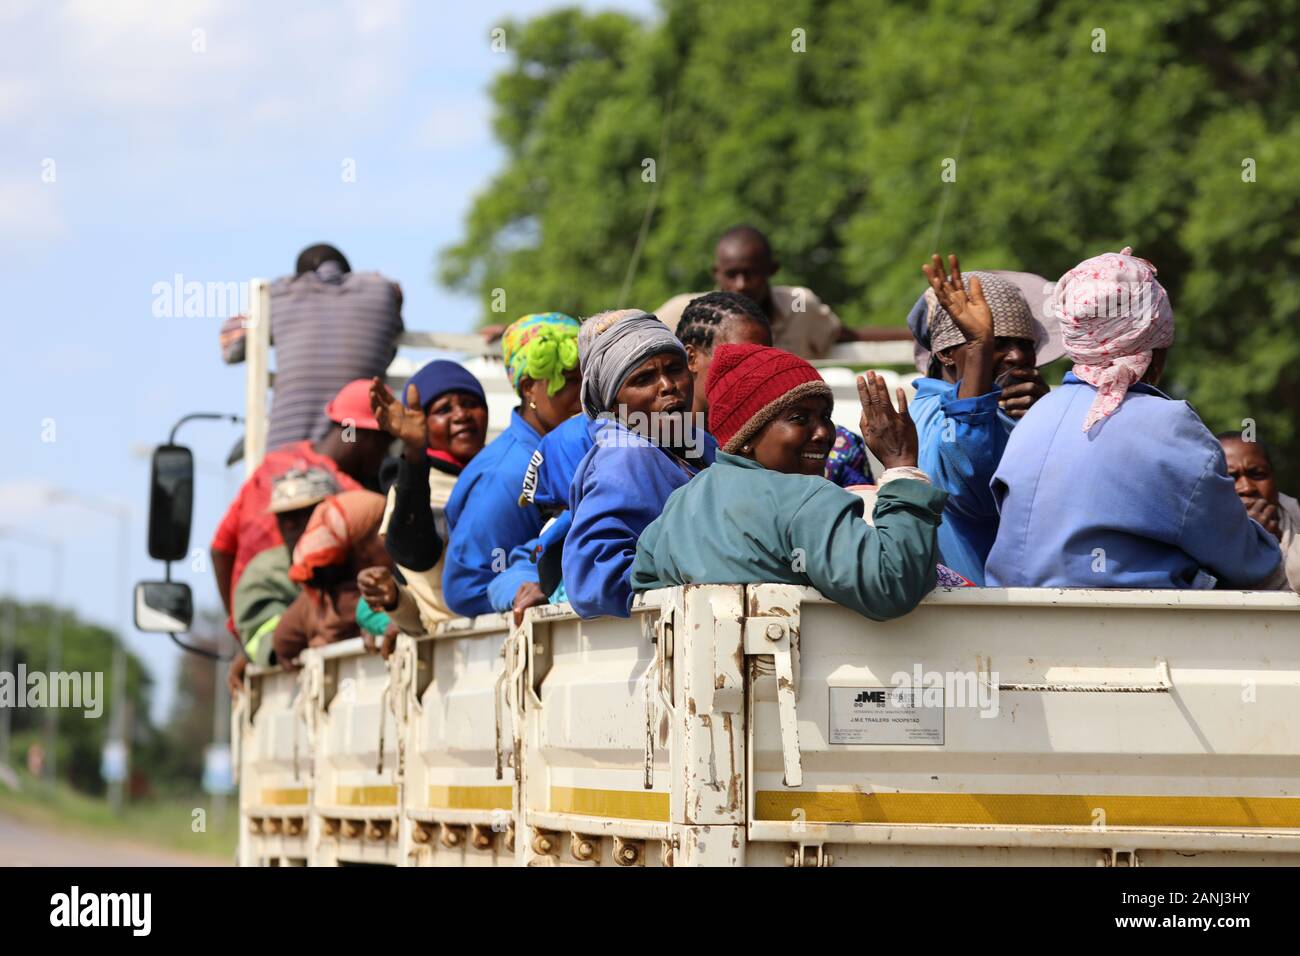 People on a truck in South Africa Stock Photo